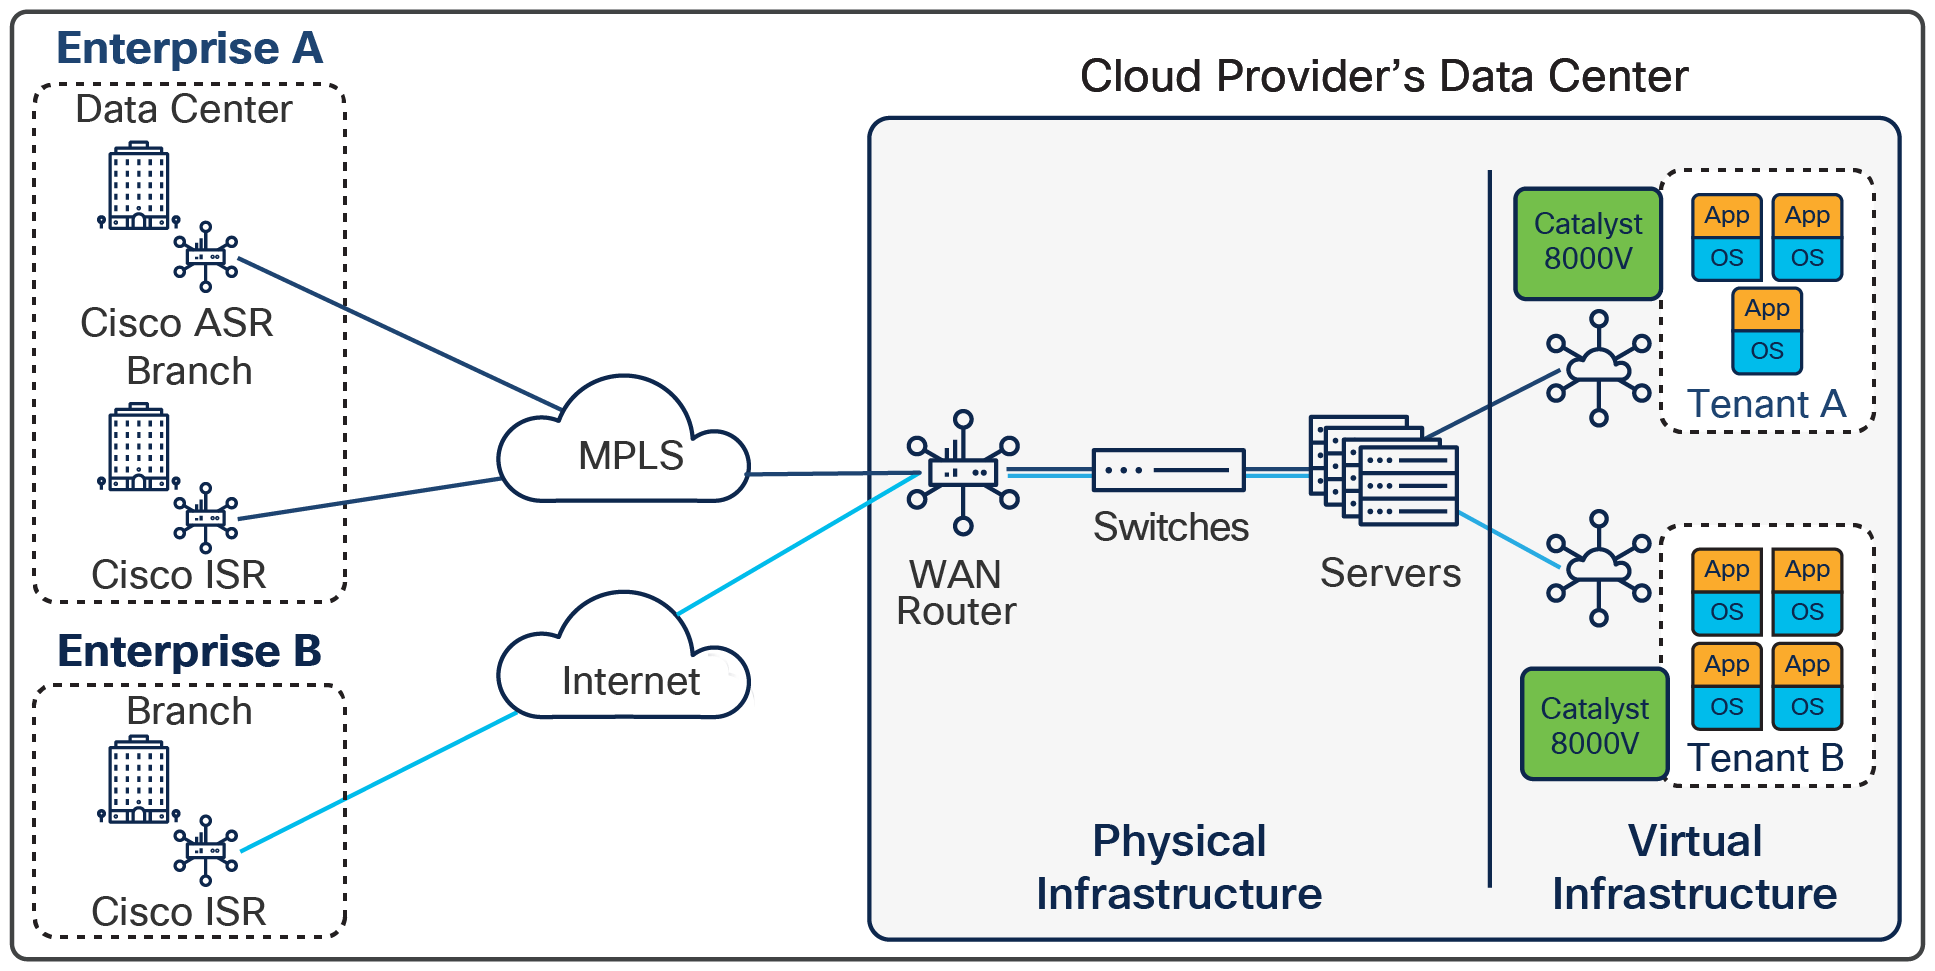 Cisco Catalyst 8000V positioned as a WAN gateway in a multitenant cloud